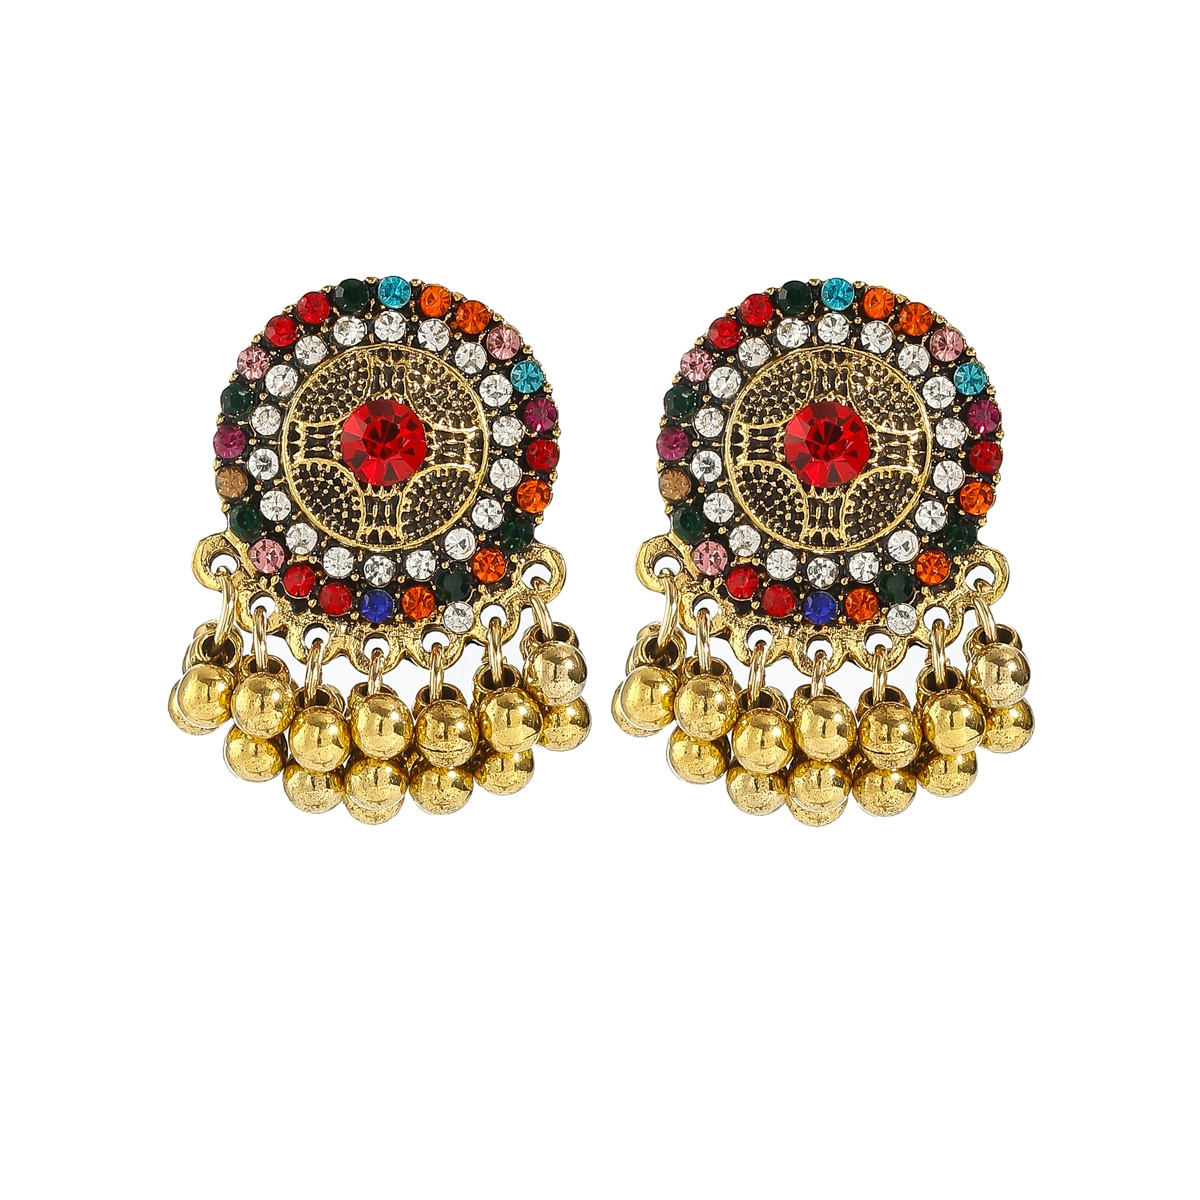 Classic-Ethnic-CZ-Indian-Earrings-For-Women-Gypsy-Round-Alloy-Jhumka-Earring-Fashion-Jewelry-Orecchi-3256804584391767-5